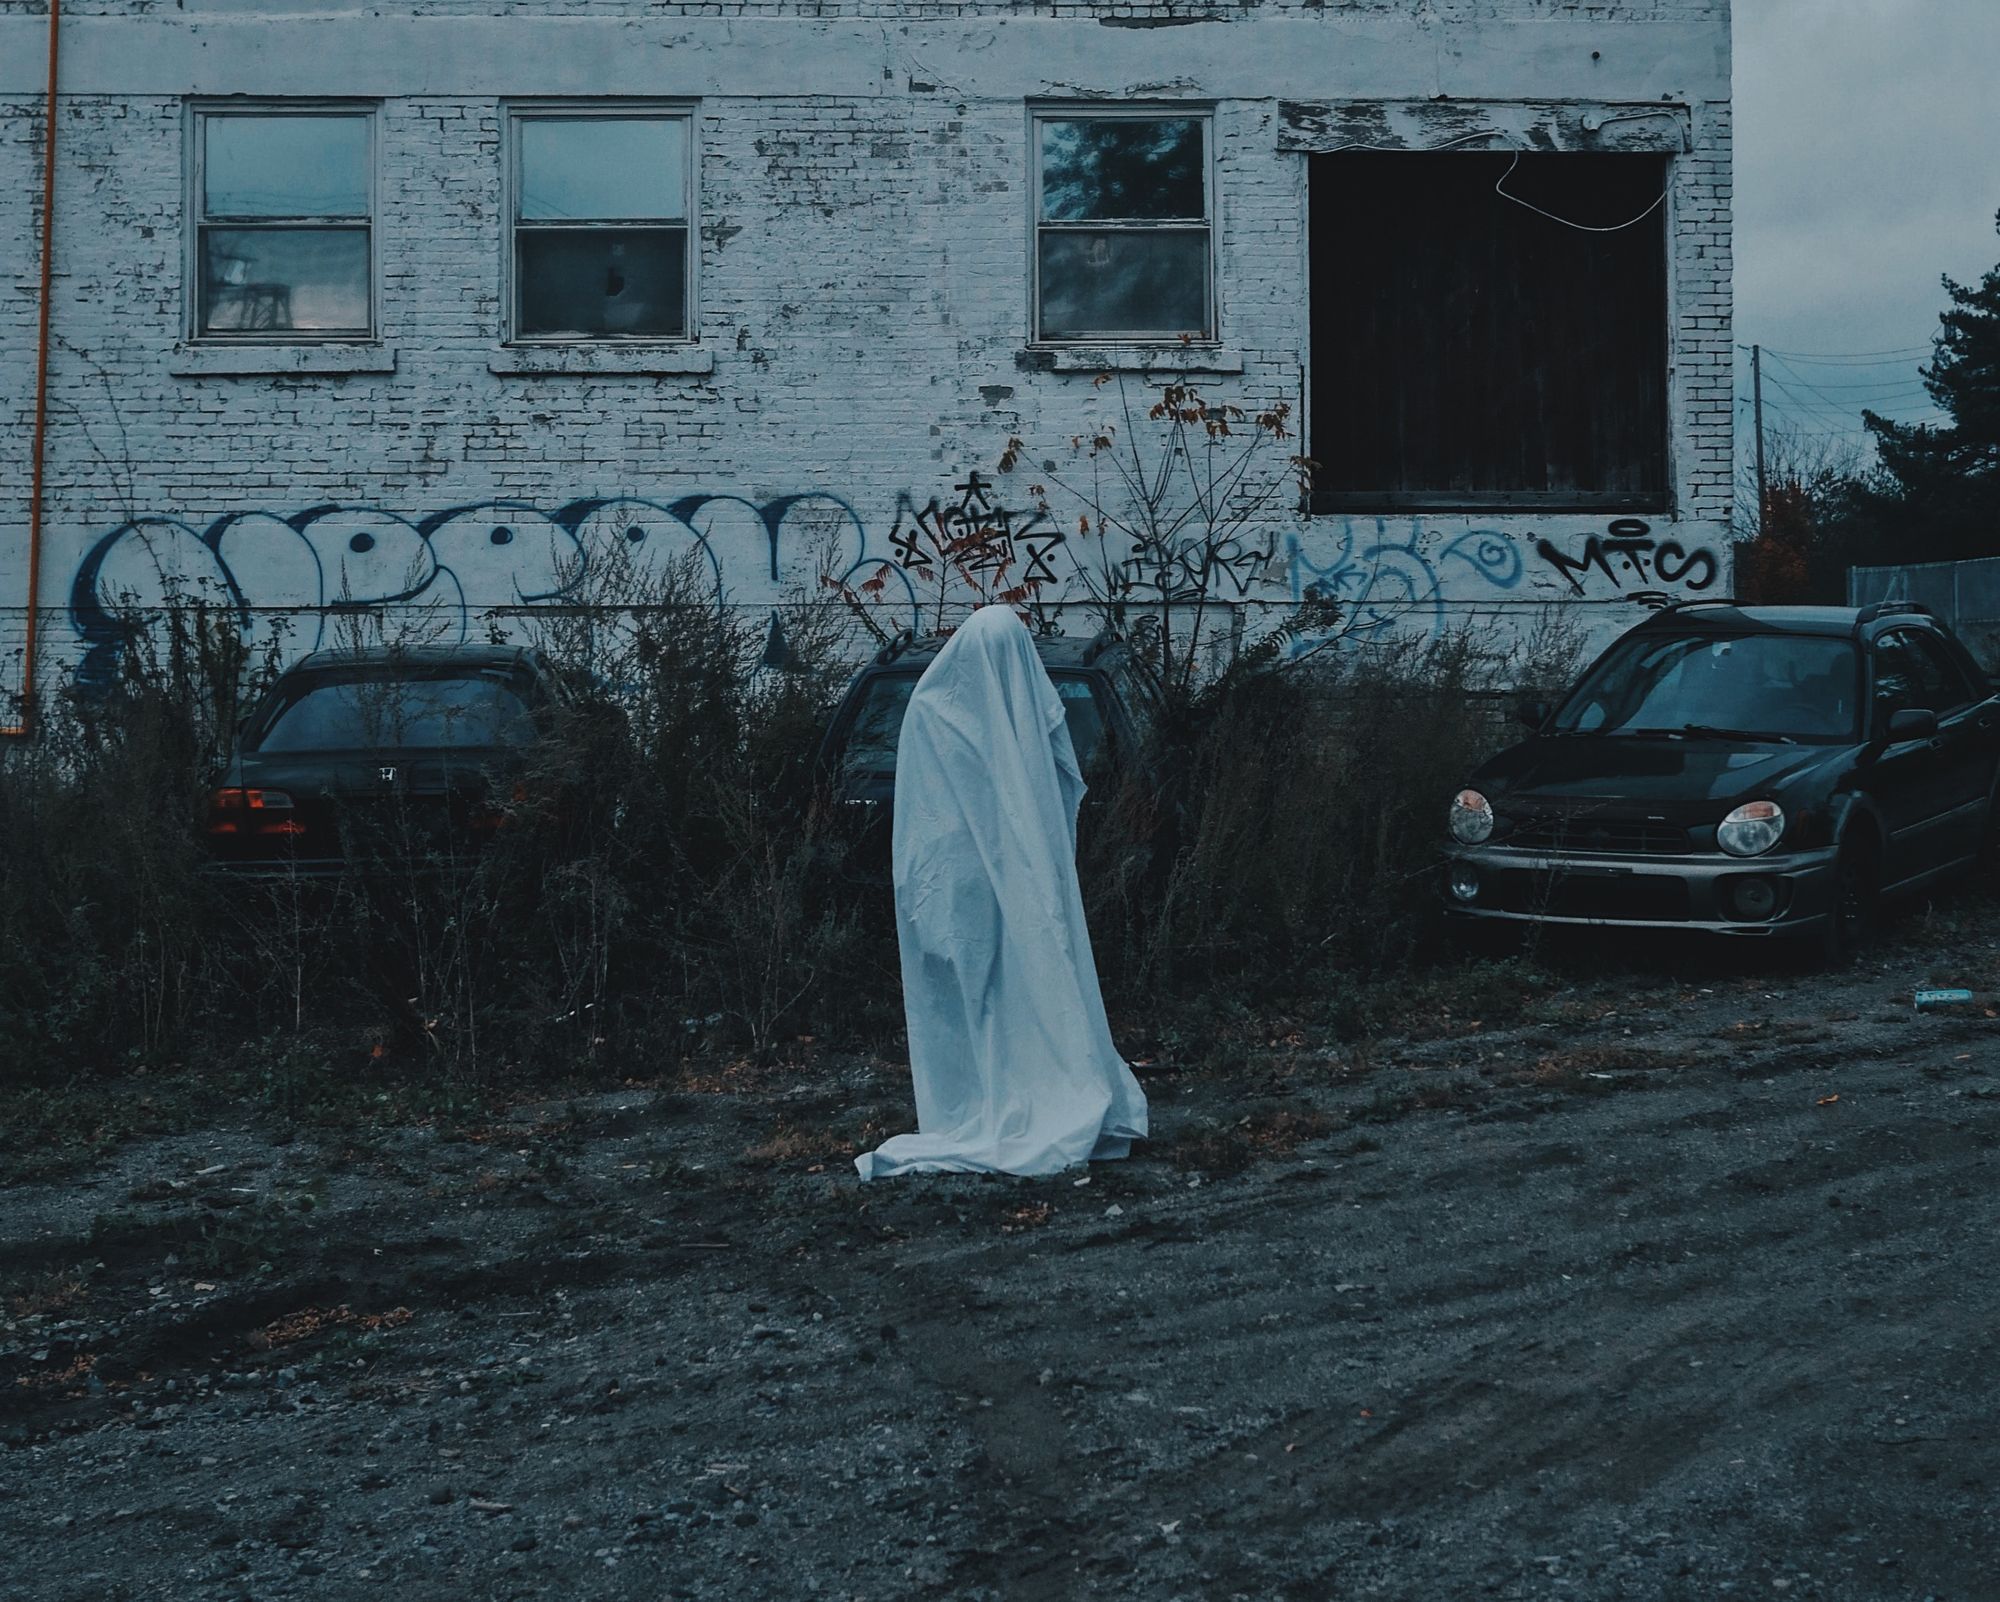 A person is standing and they're covered from head to toe in a white bedspread in an abandoned car park.